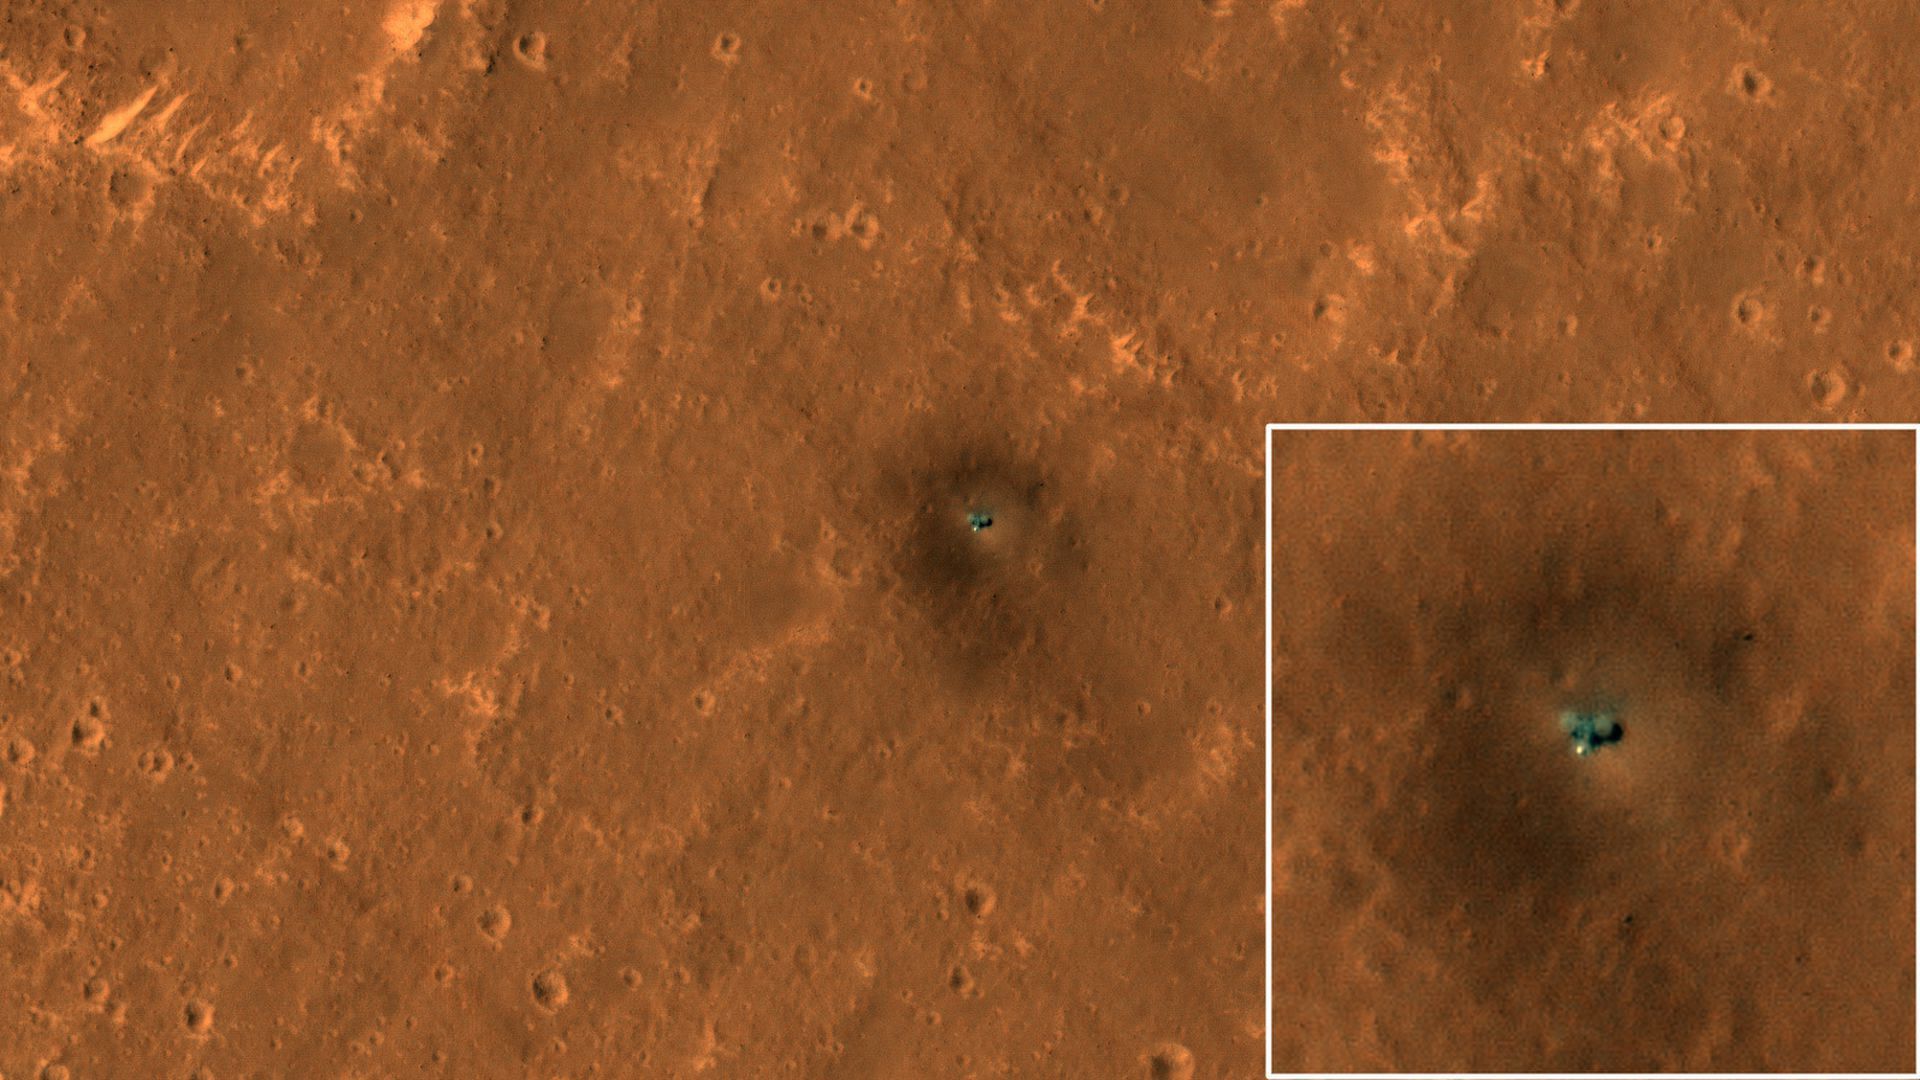 NASA's Mars Reconnaissance Orbiter caught sight of the space agency's InSight lander on the Martian surface